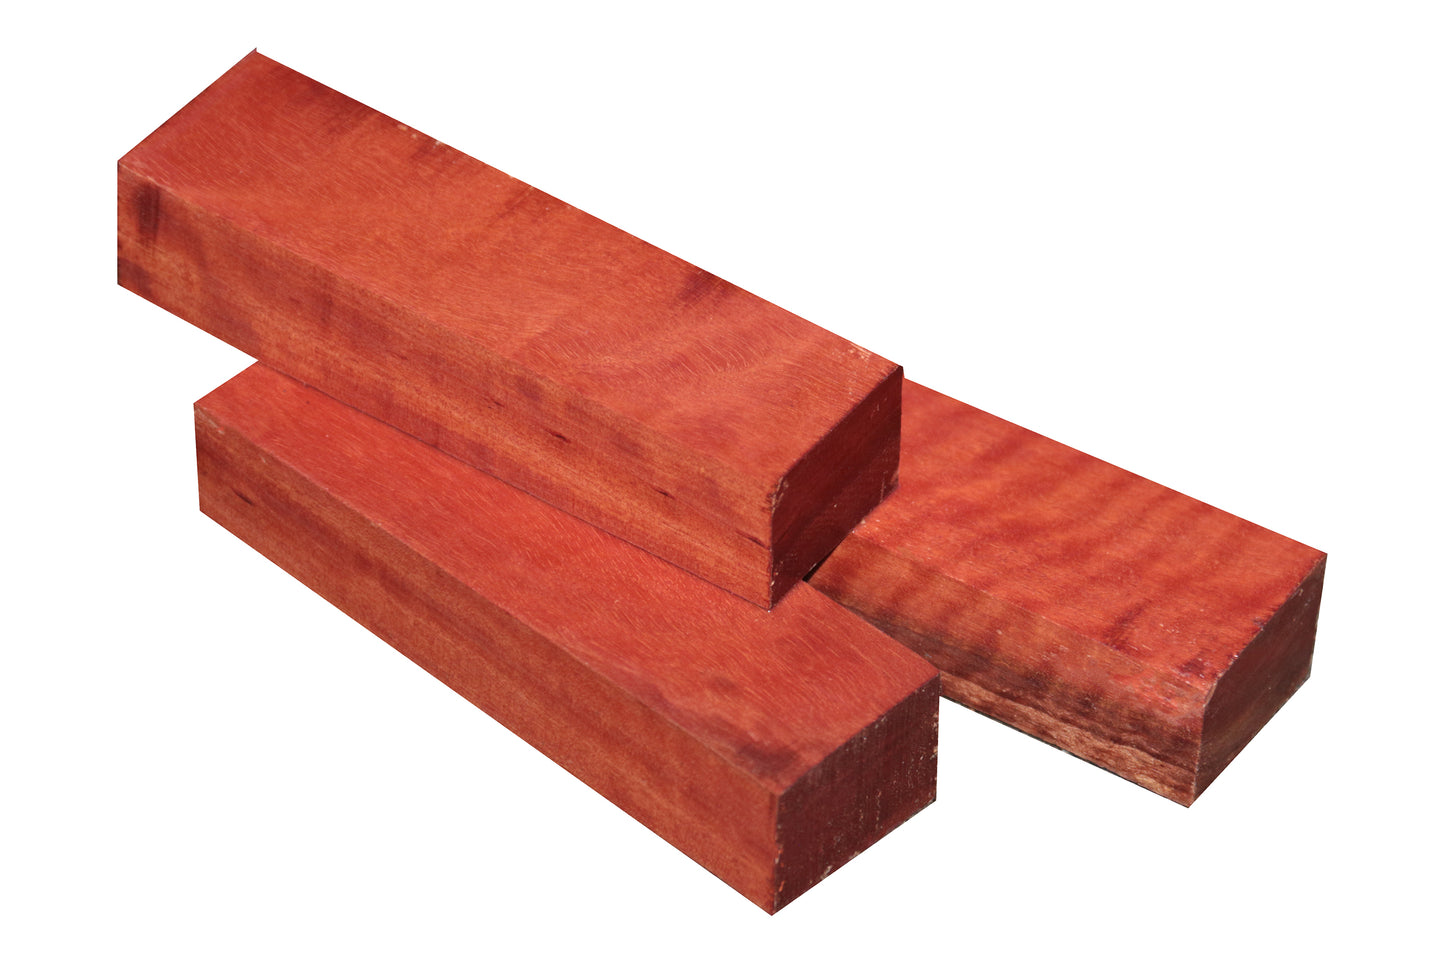 Red River Gum Craft/Knife Blank (5-1/8" x 1-1/2" x 7/8")